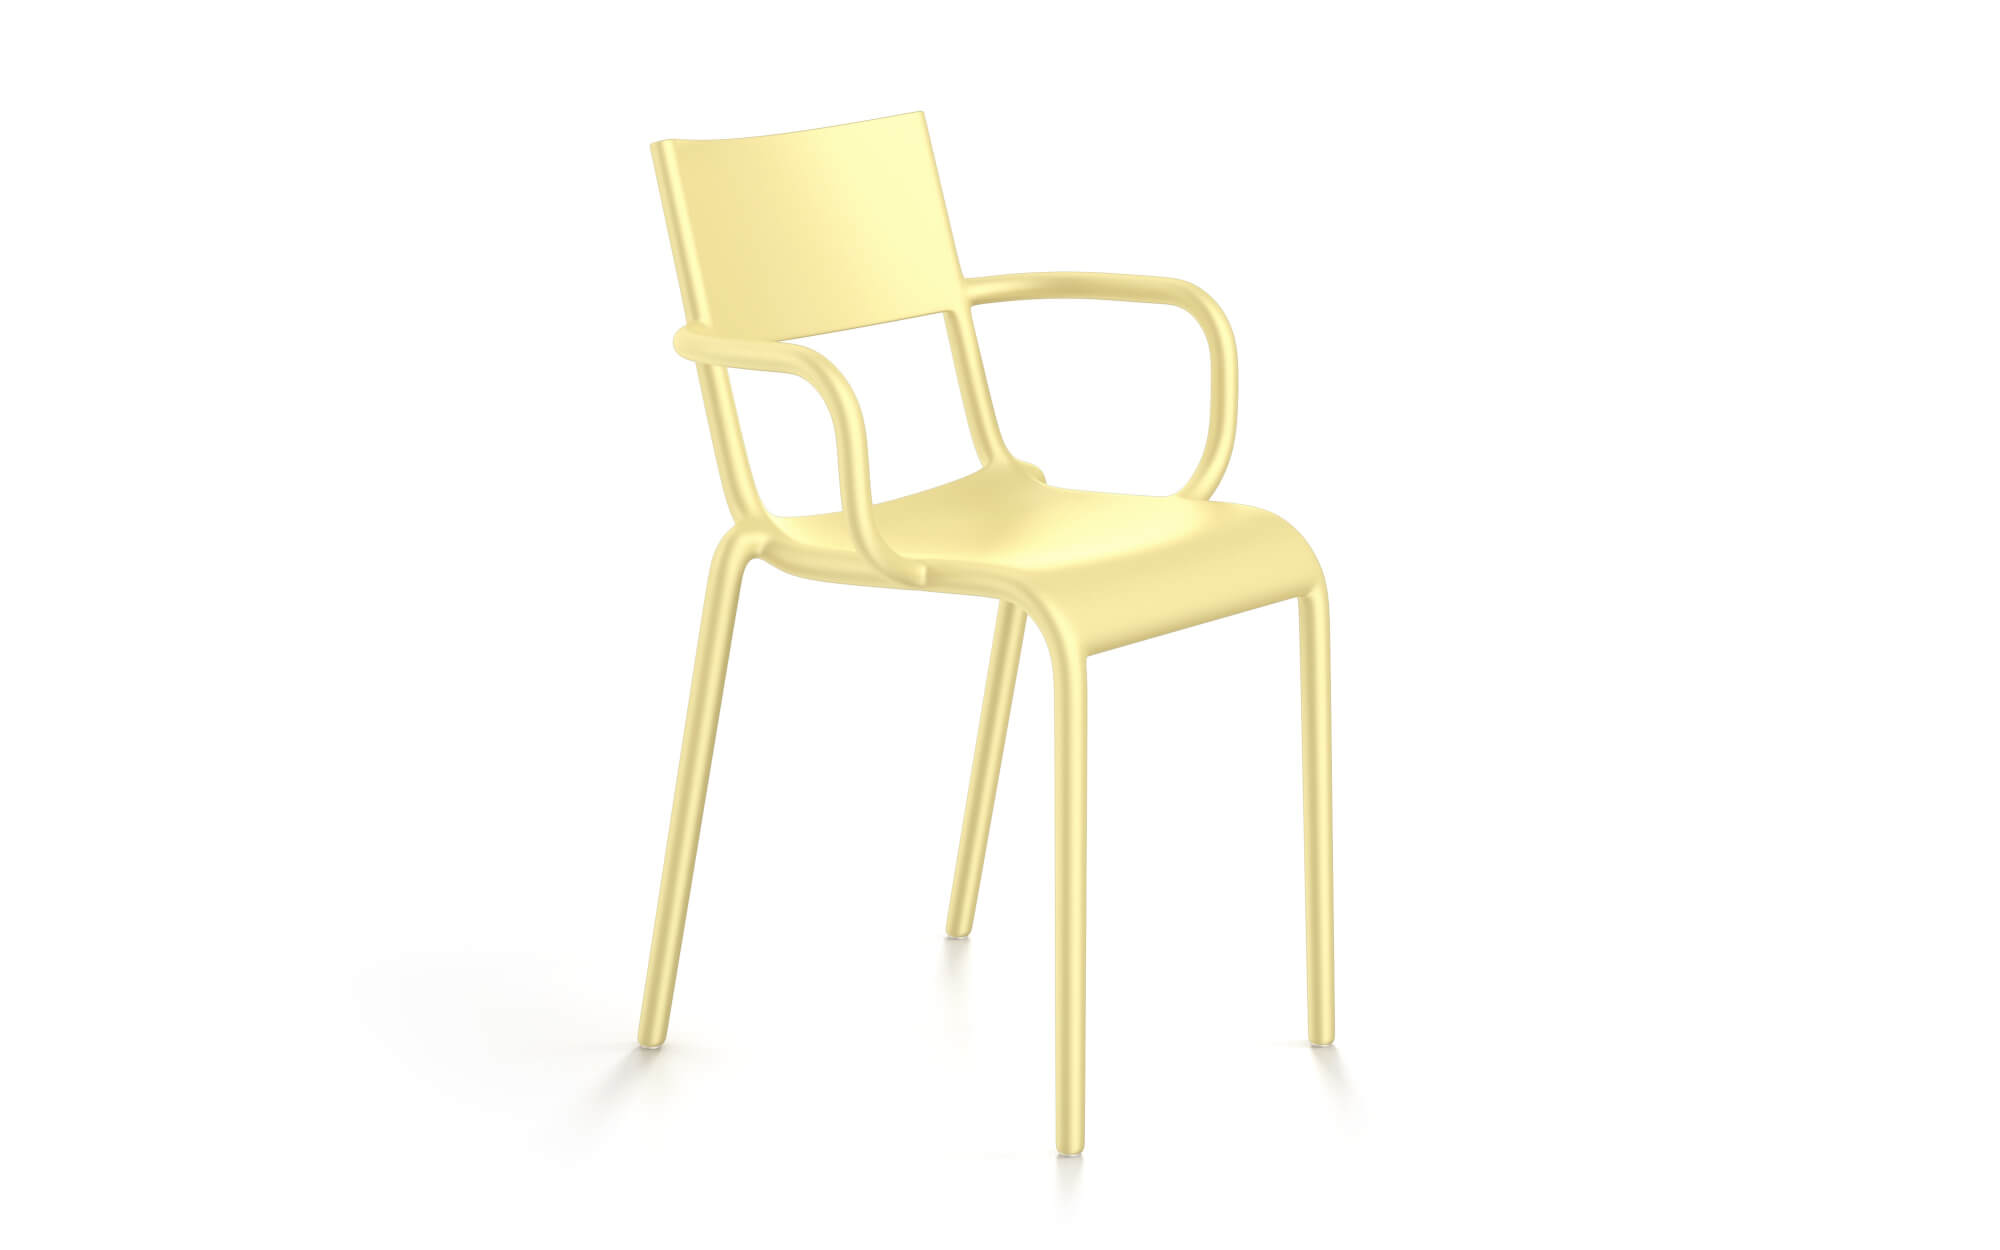 GENERIC.A (KARTELL) - Chairs